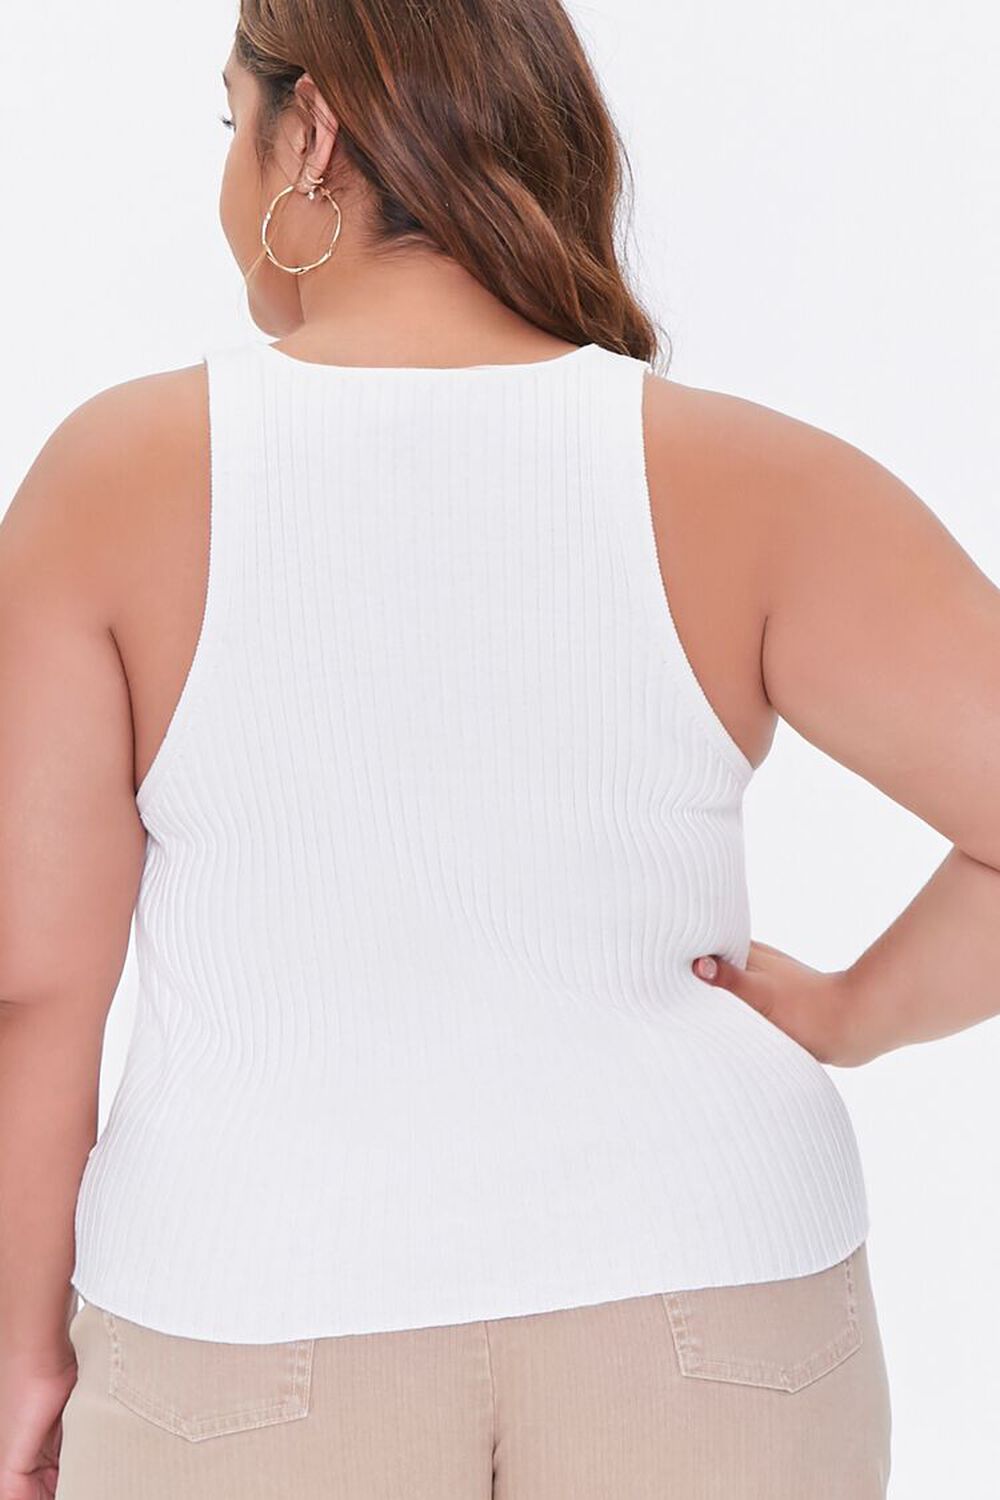 IVORY Plus Size Sweater-Knit Tank Top, image 3